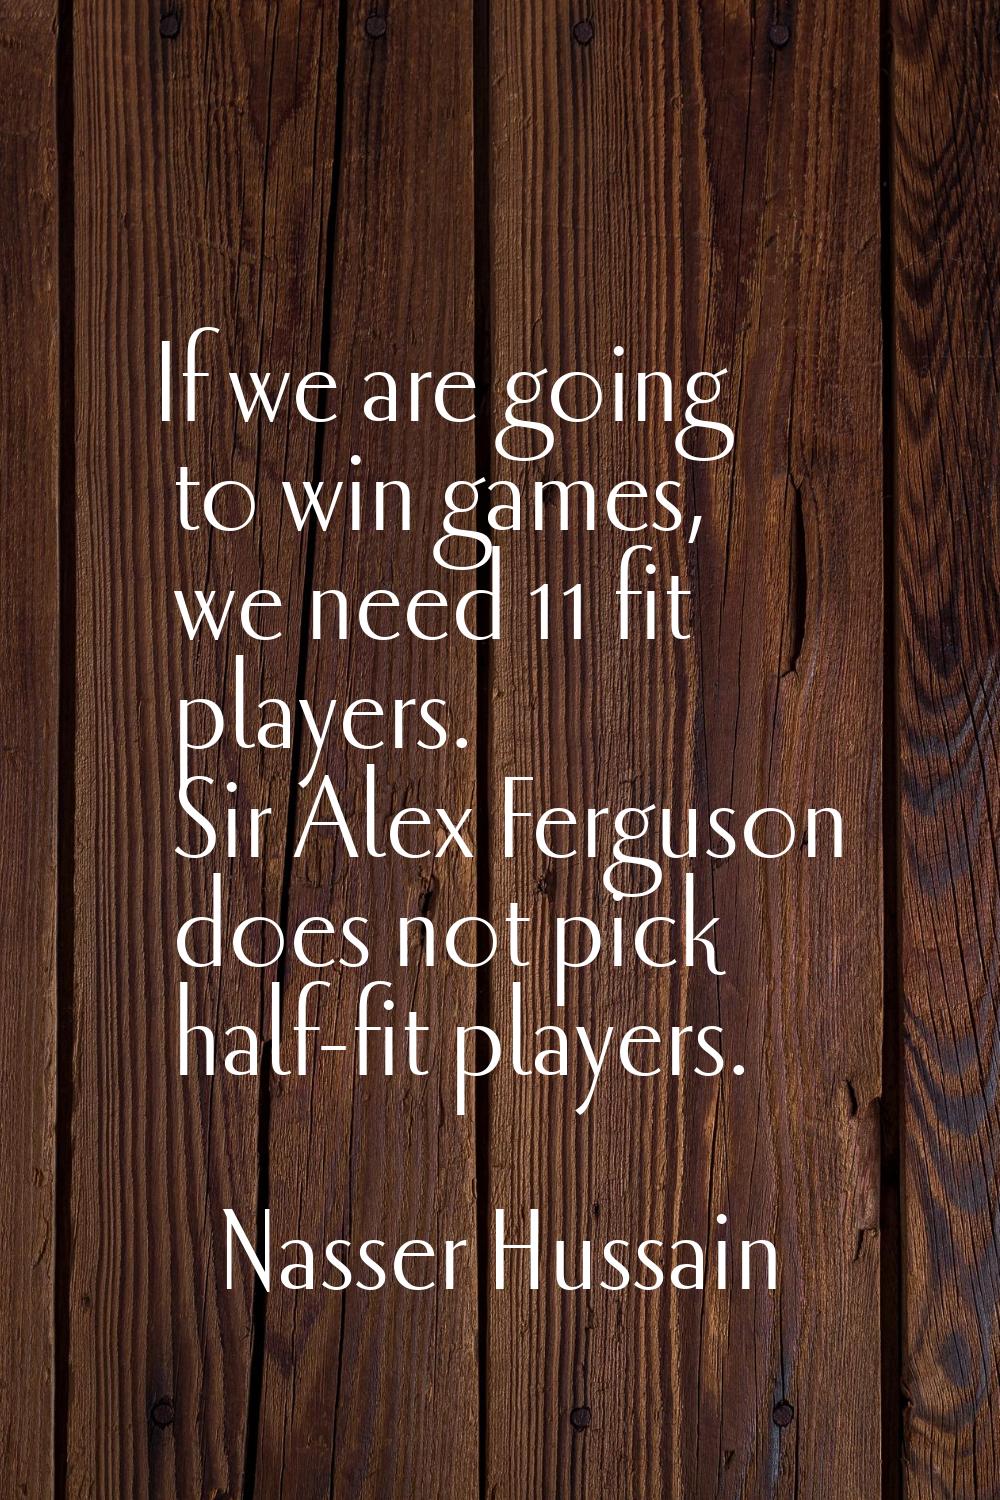 If we are going to win games, we need 11 fit players. Sir Alex Ferguson does not pick half-fit play